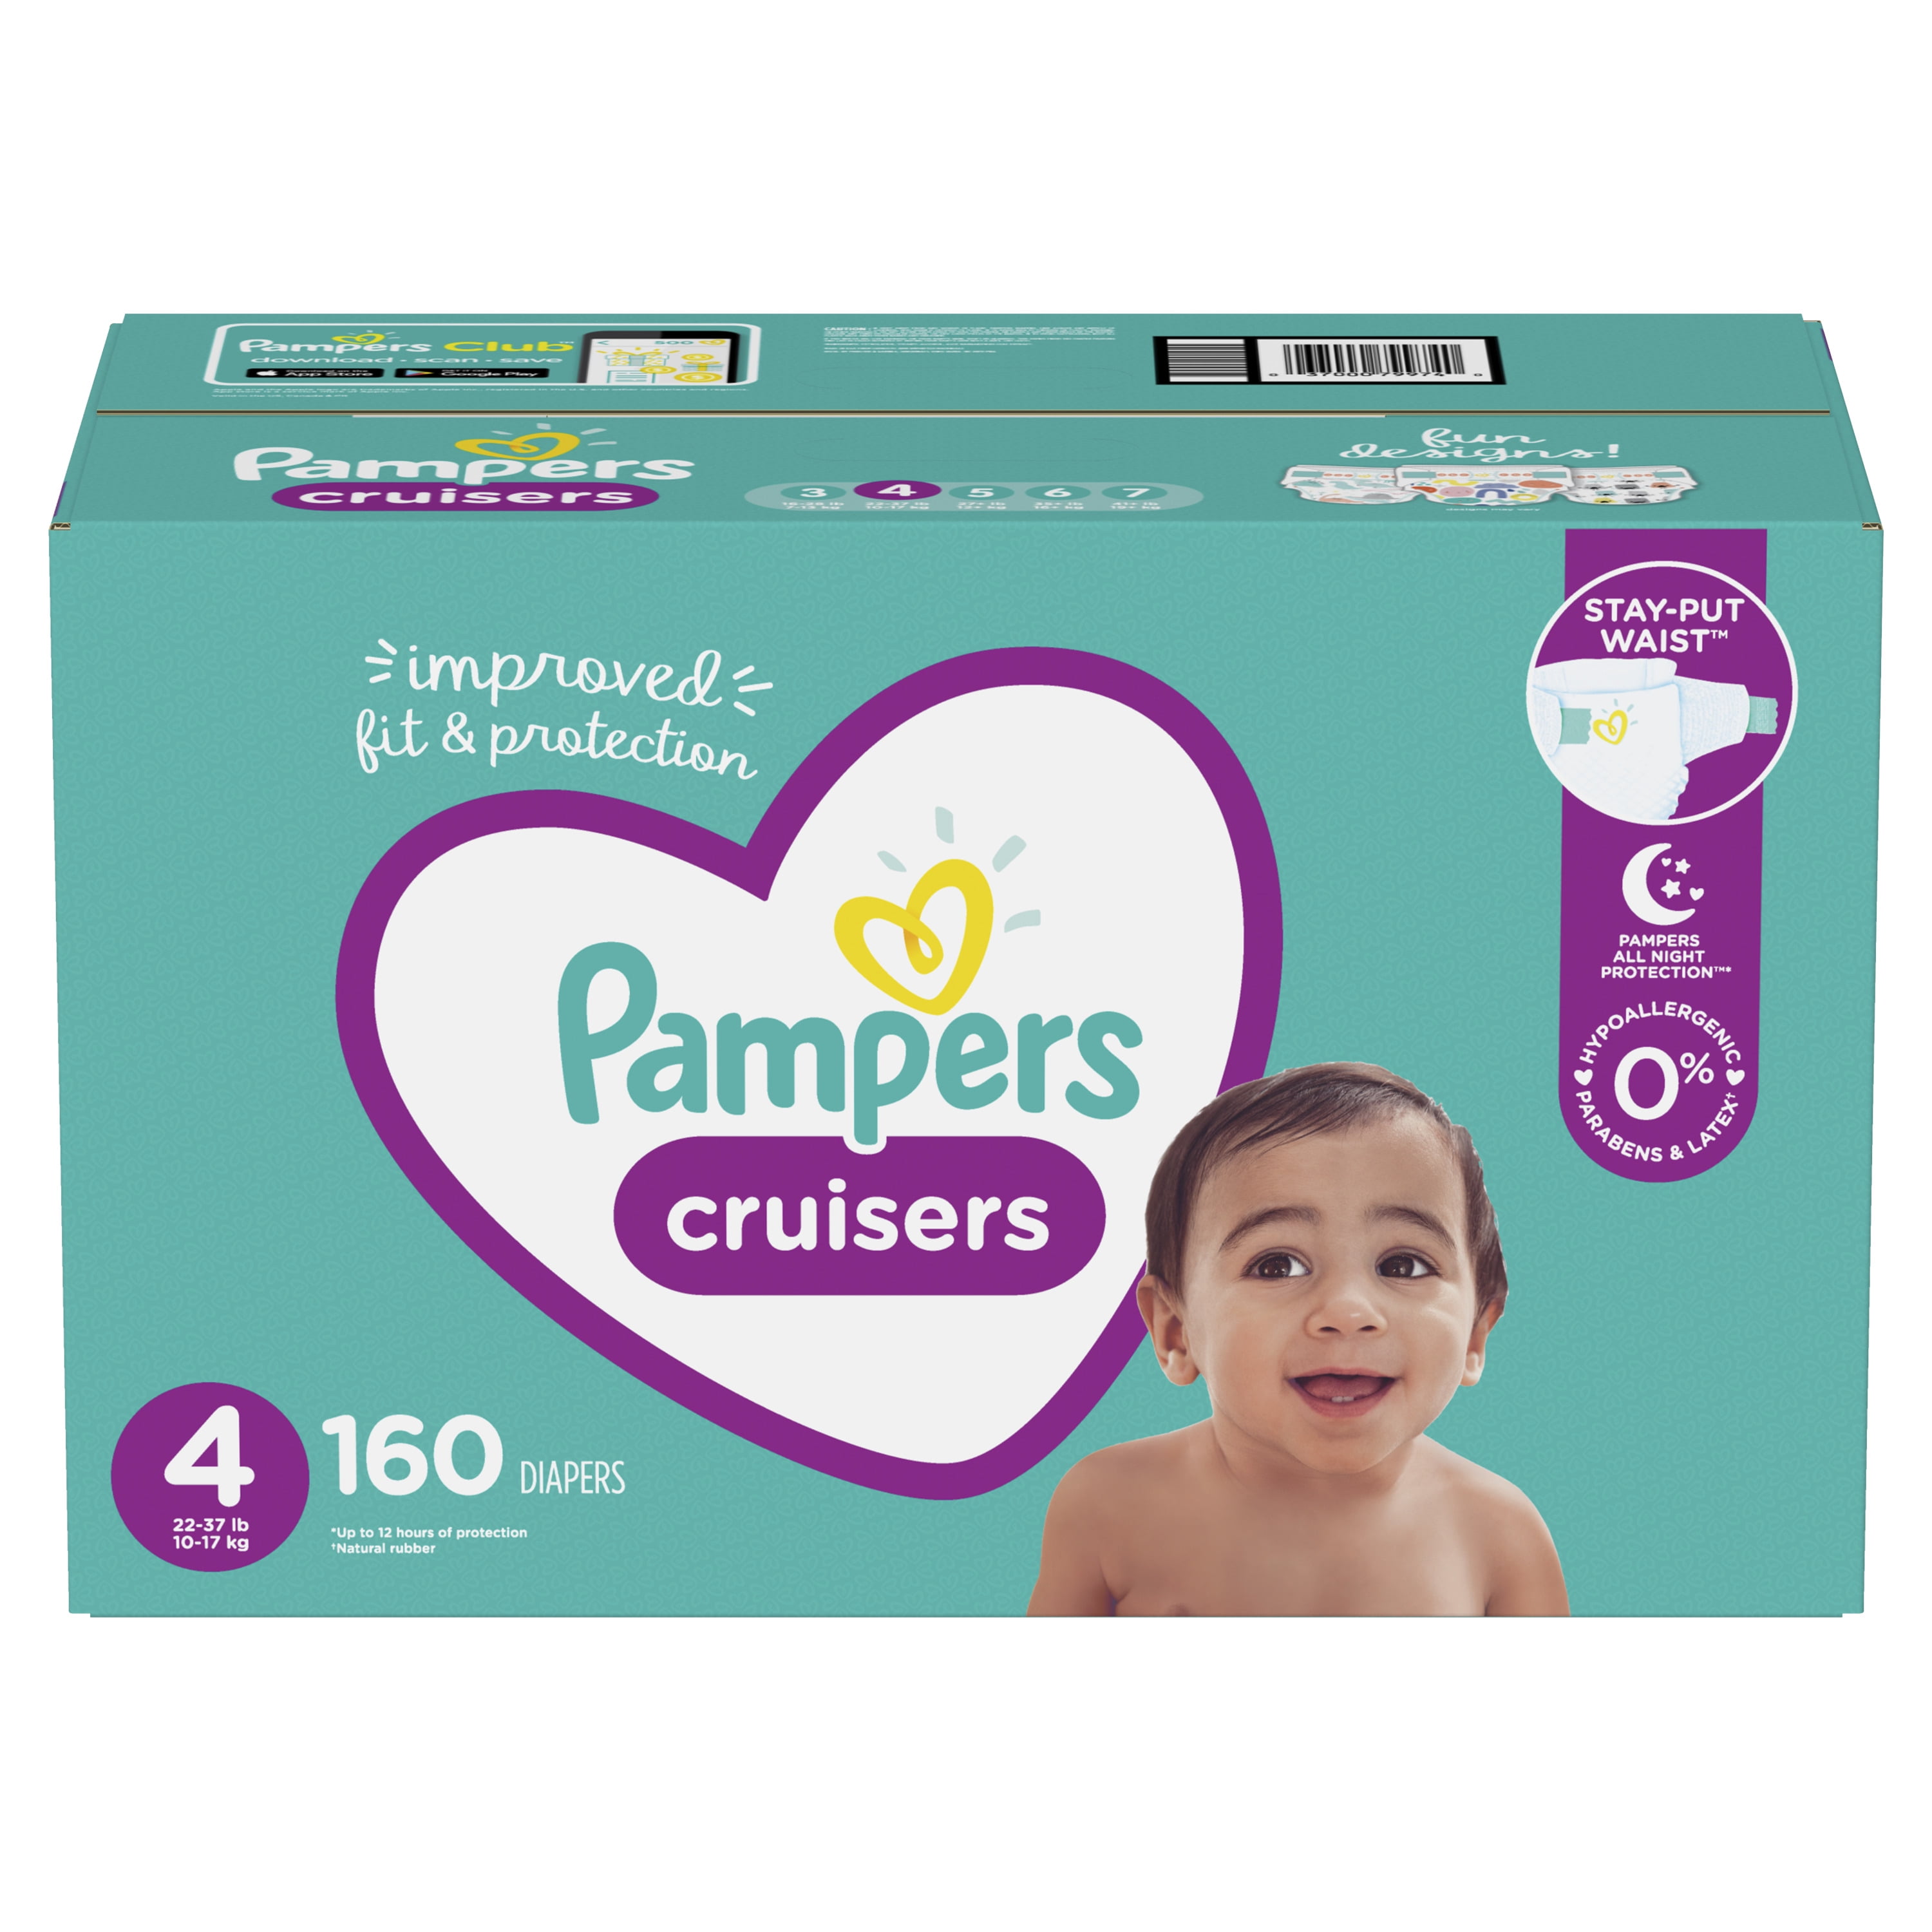 Diapers Size 4 124 Count Enormous Pack Pampers Cruisers Disposable Baby Diapers